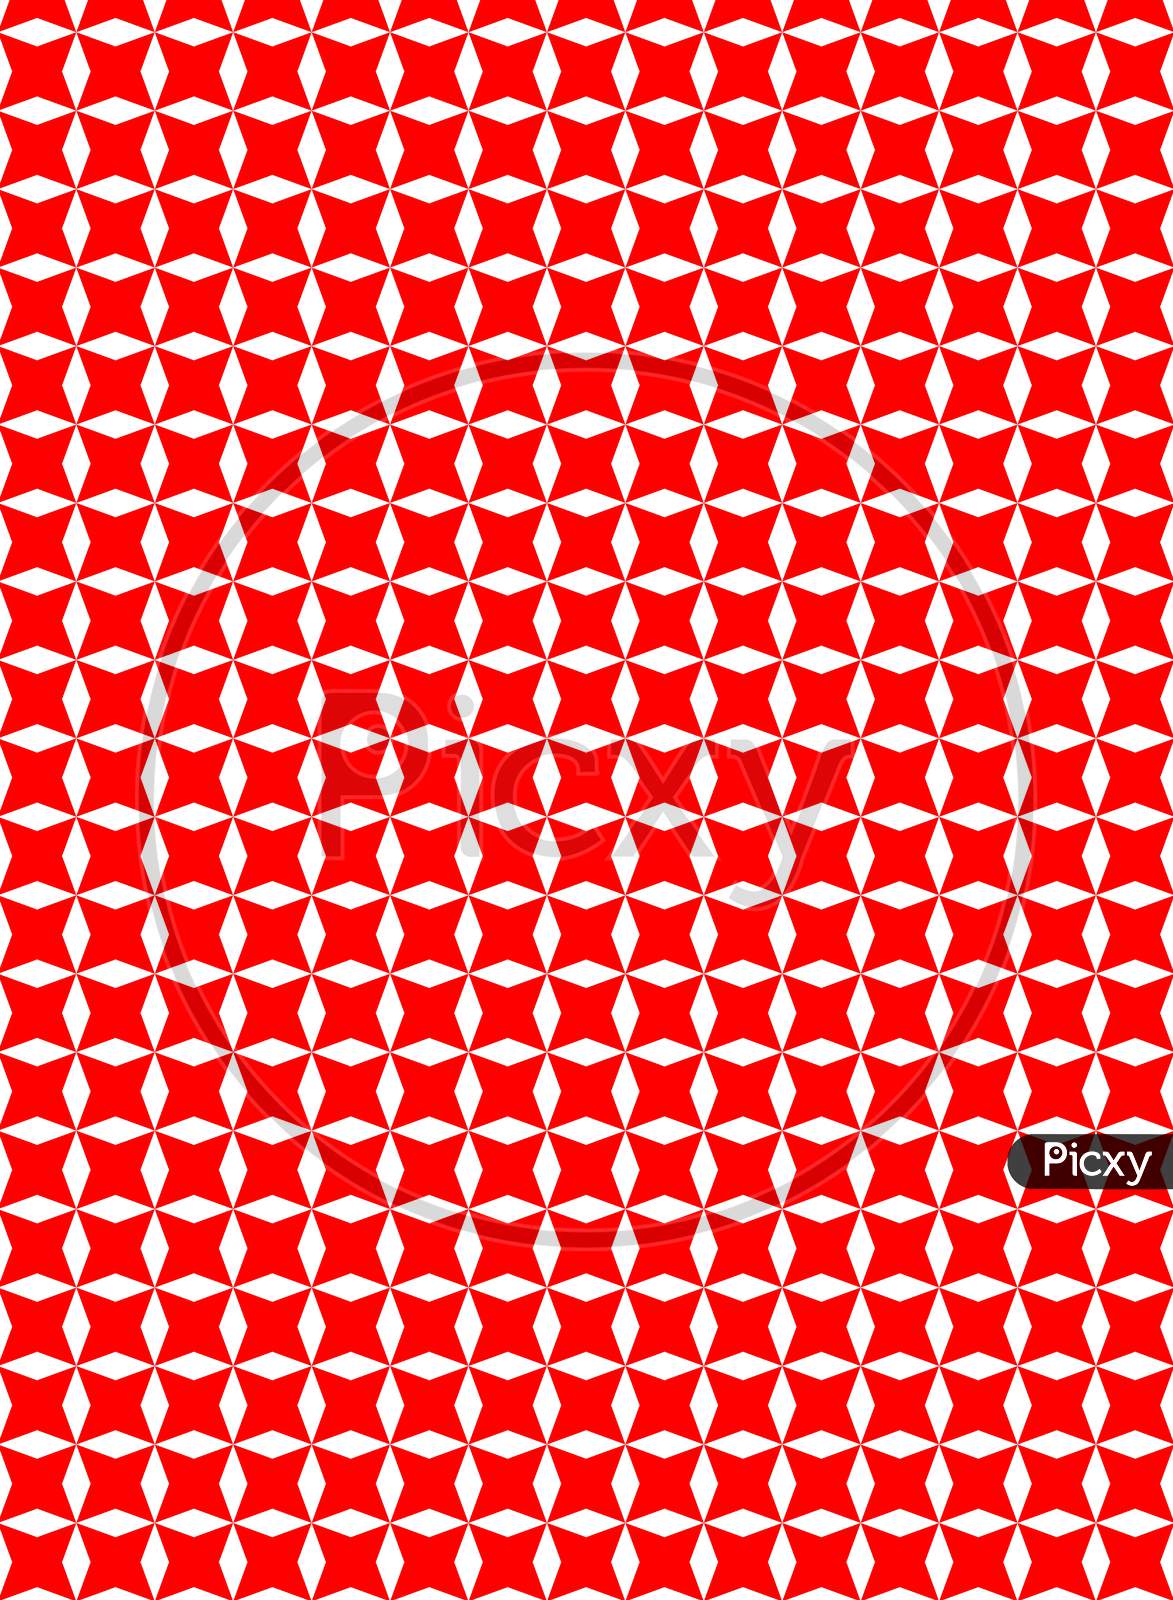 Patterns and  background design